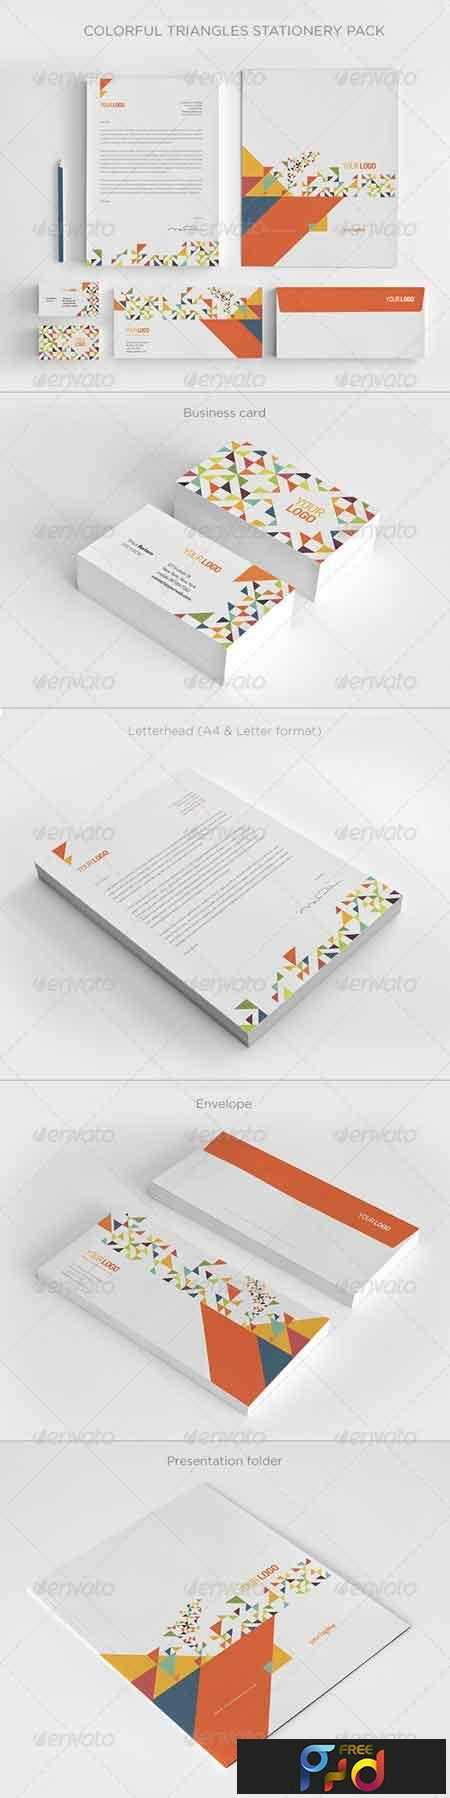 FreePsdVn.com 1809264 VECTOR colorful triangles stationery pack 7550531